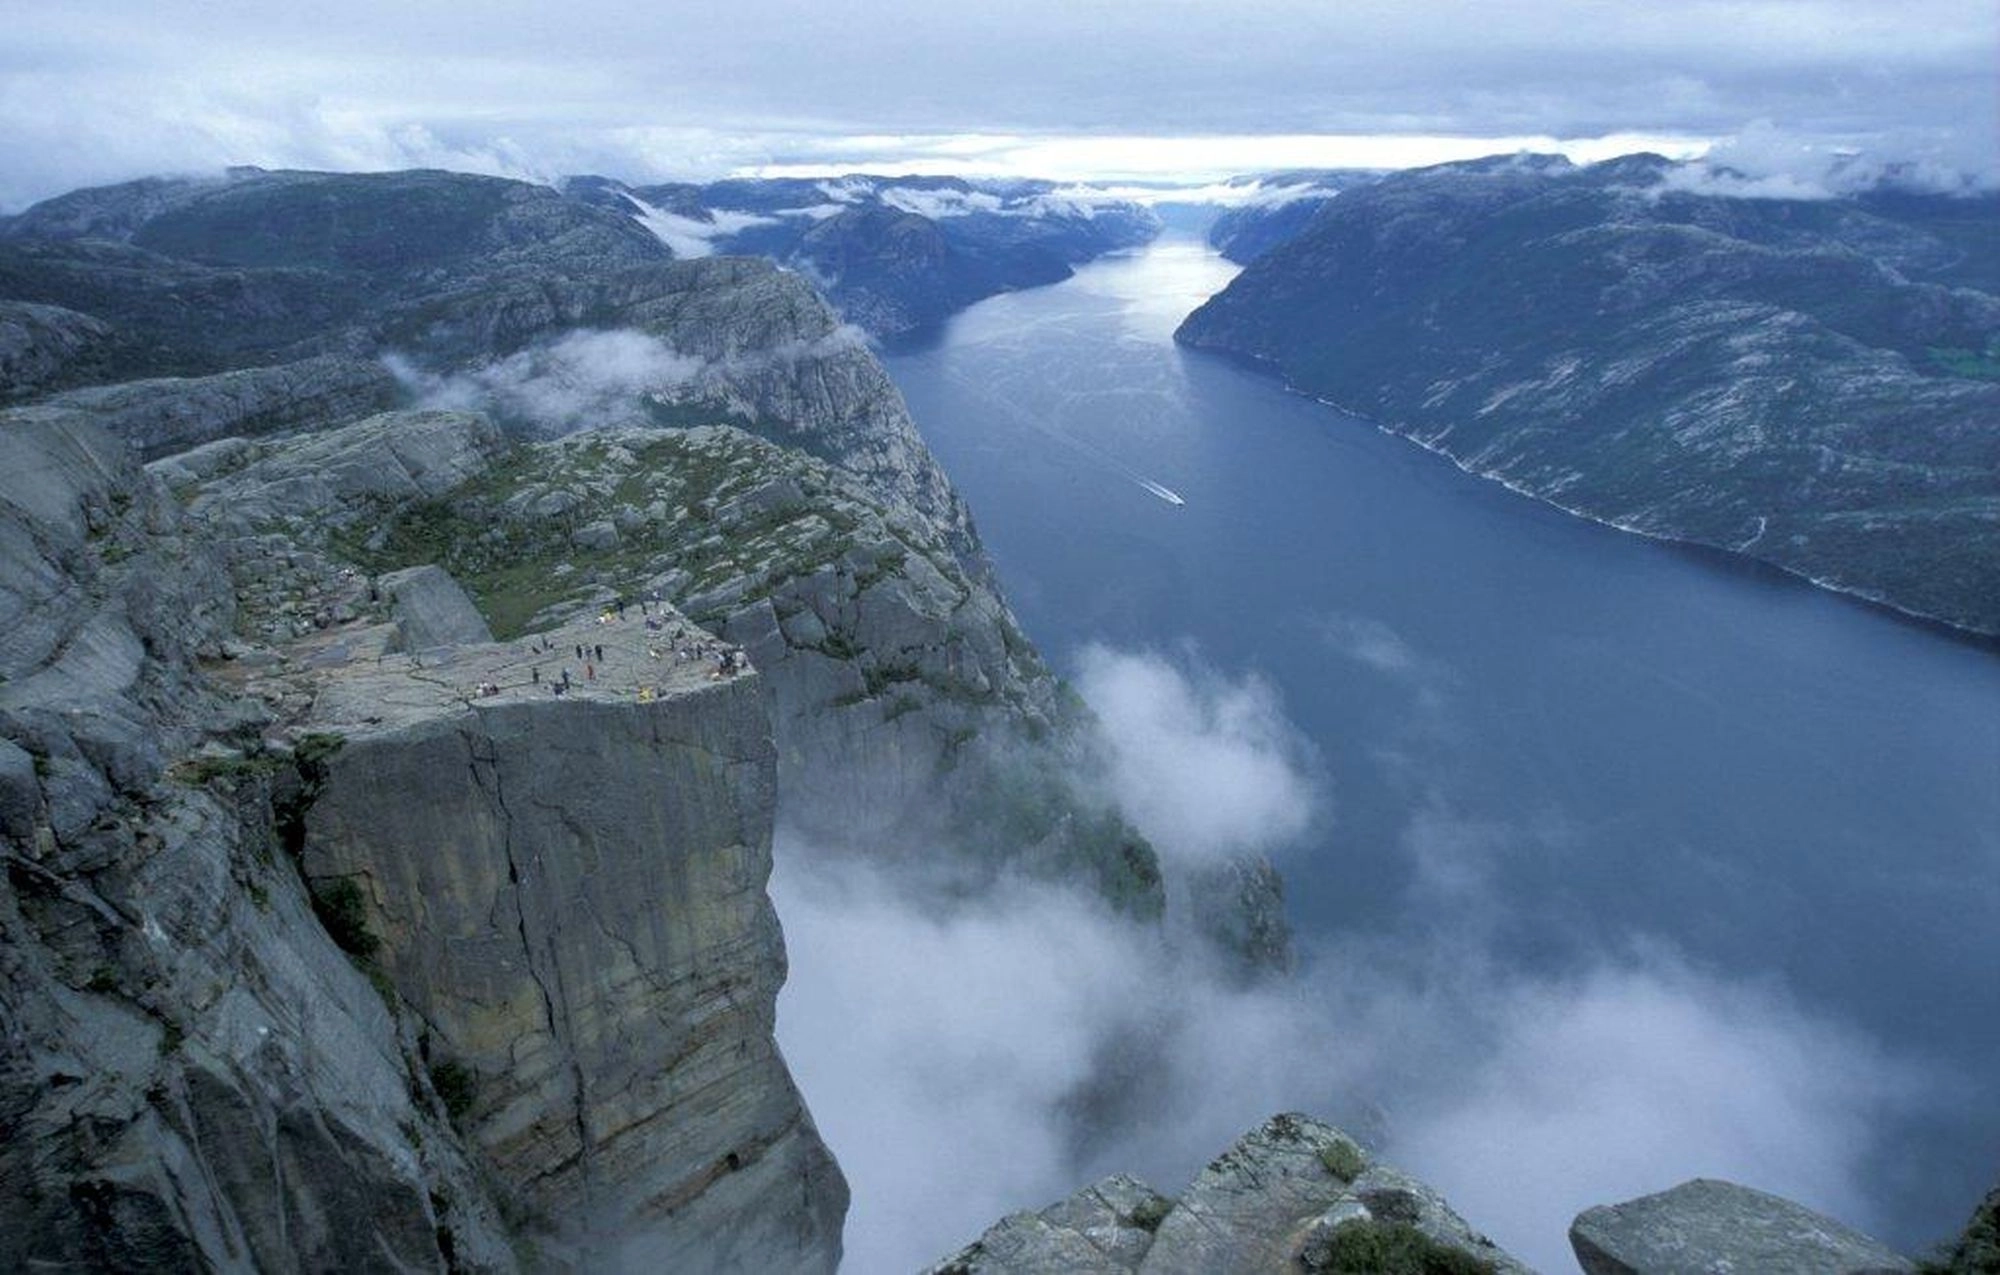 The Pulpit Rock and Lysefjord - Stavanger, Norway